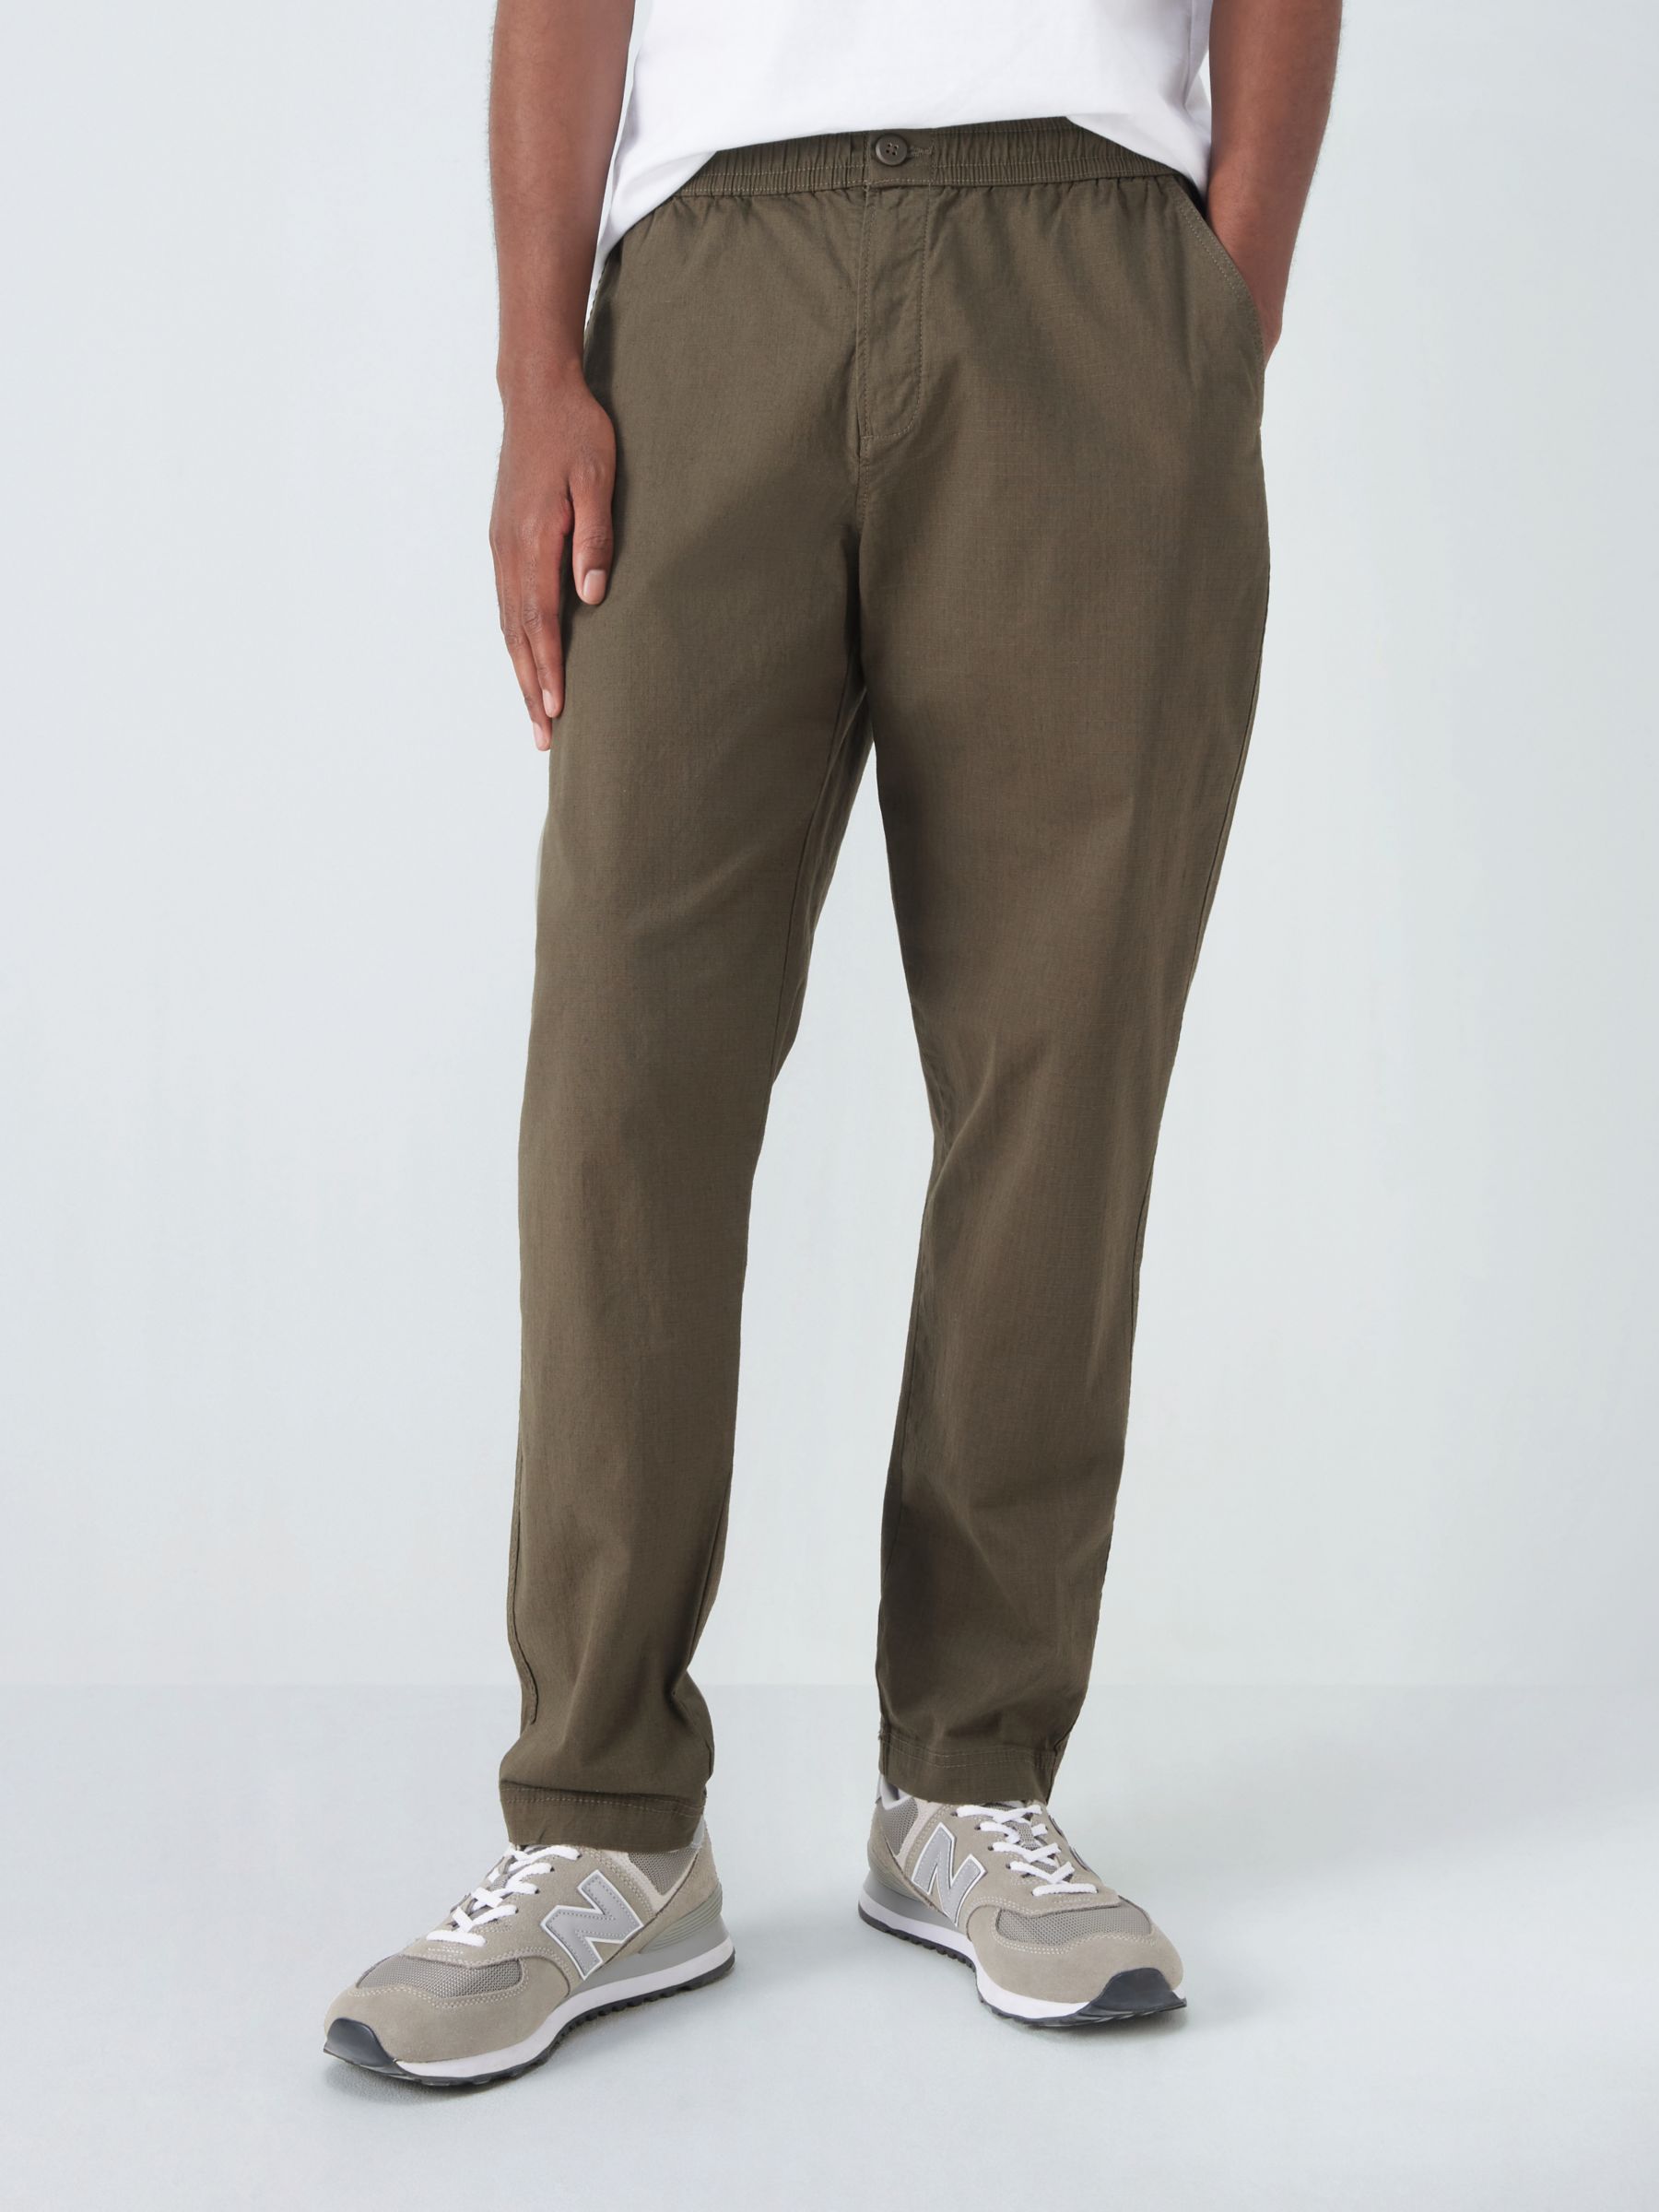 John Lewis ANYDAY Relaxed Fit Ripstop Stretch Cotton Ankle Trousers, Khaki  at John Lewis & Partners